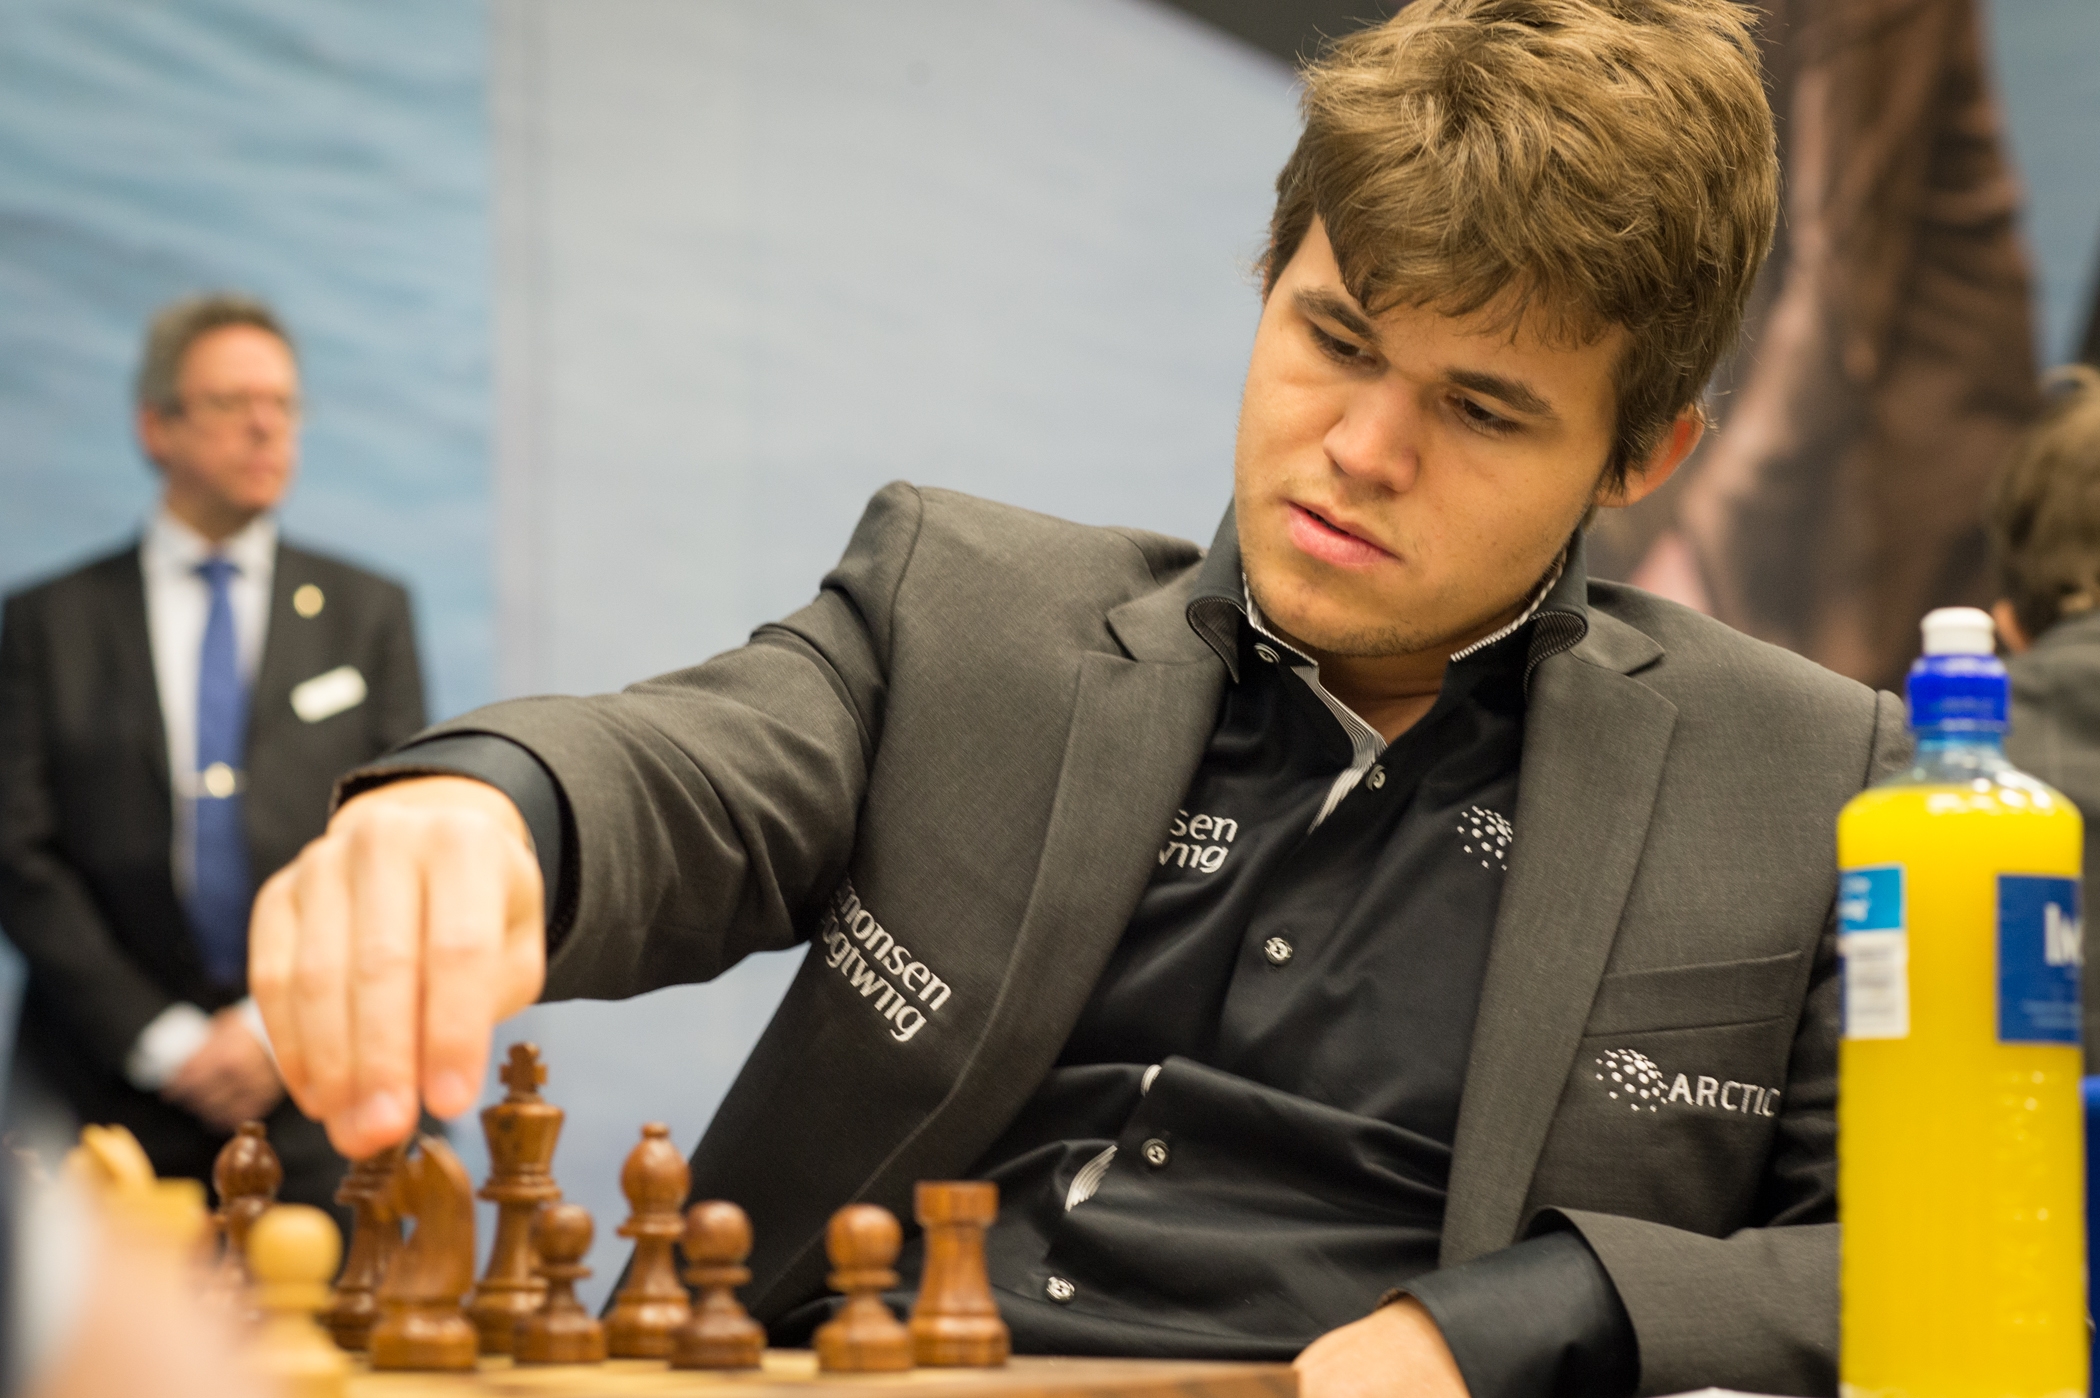 Viswanathan Anand and Magnus Carlsen of Norway during their Tenth match at  FIDE World Chess